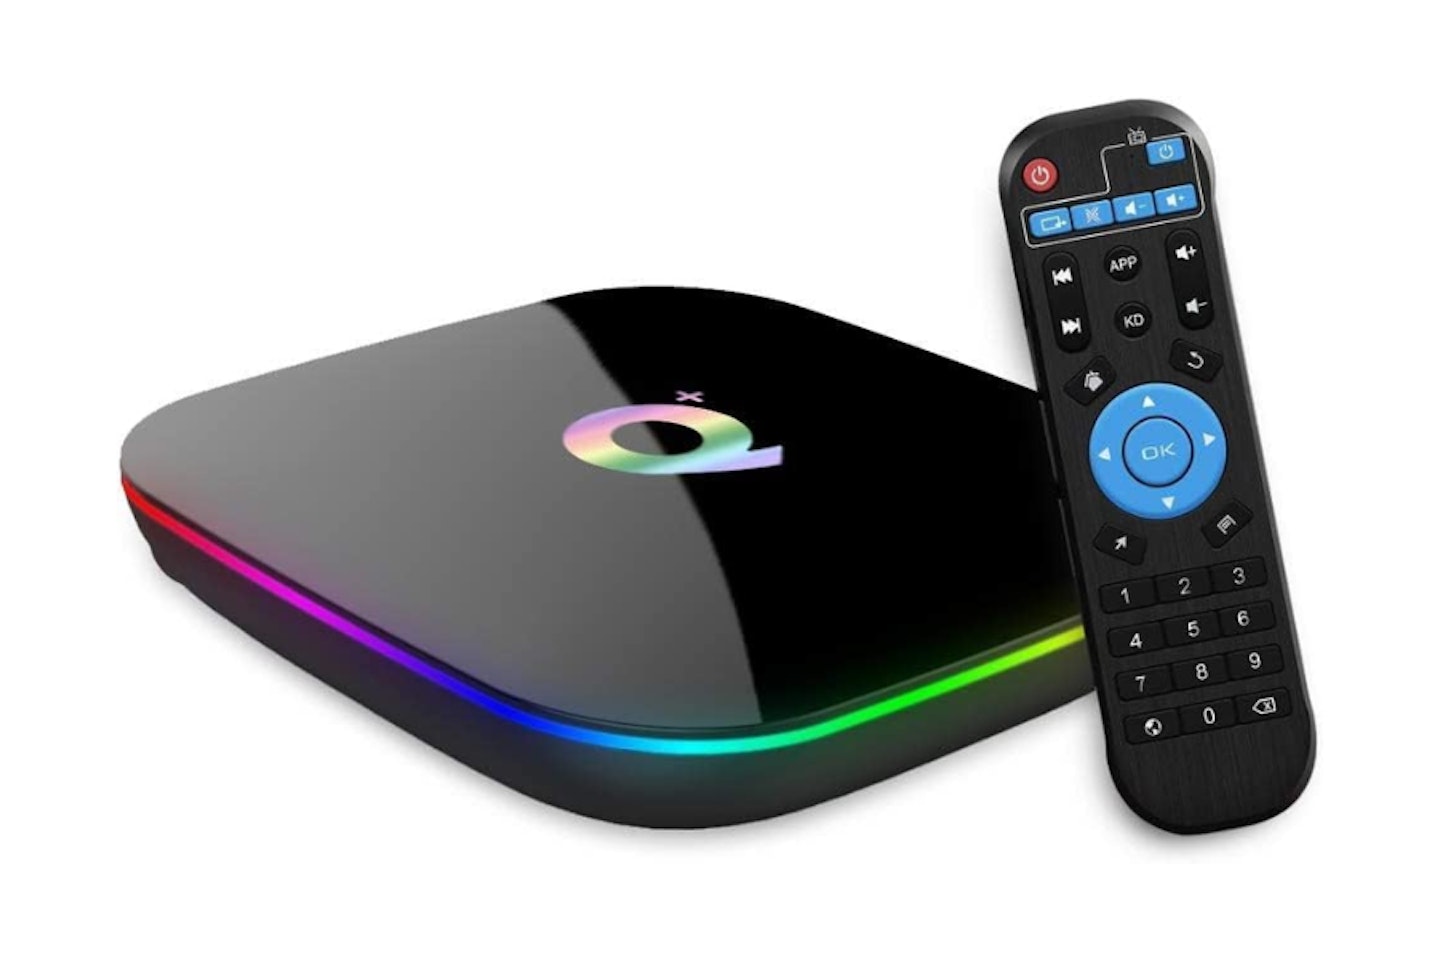 Buy Android TV Box, UK